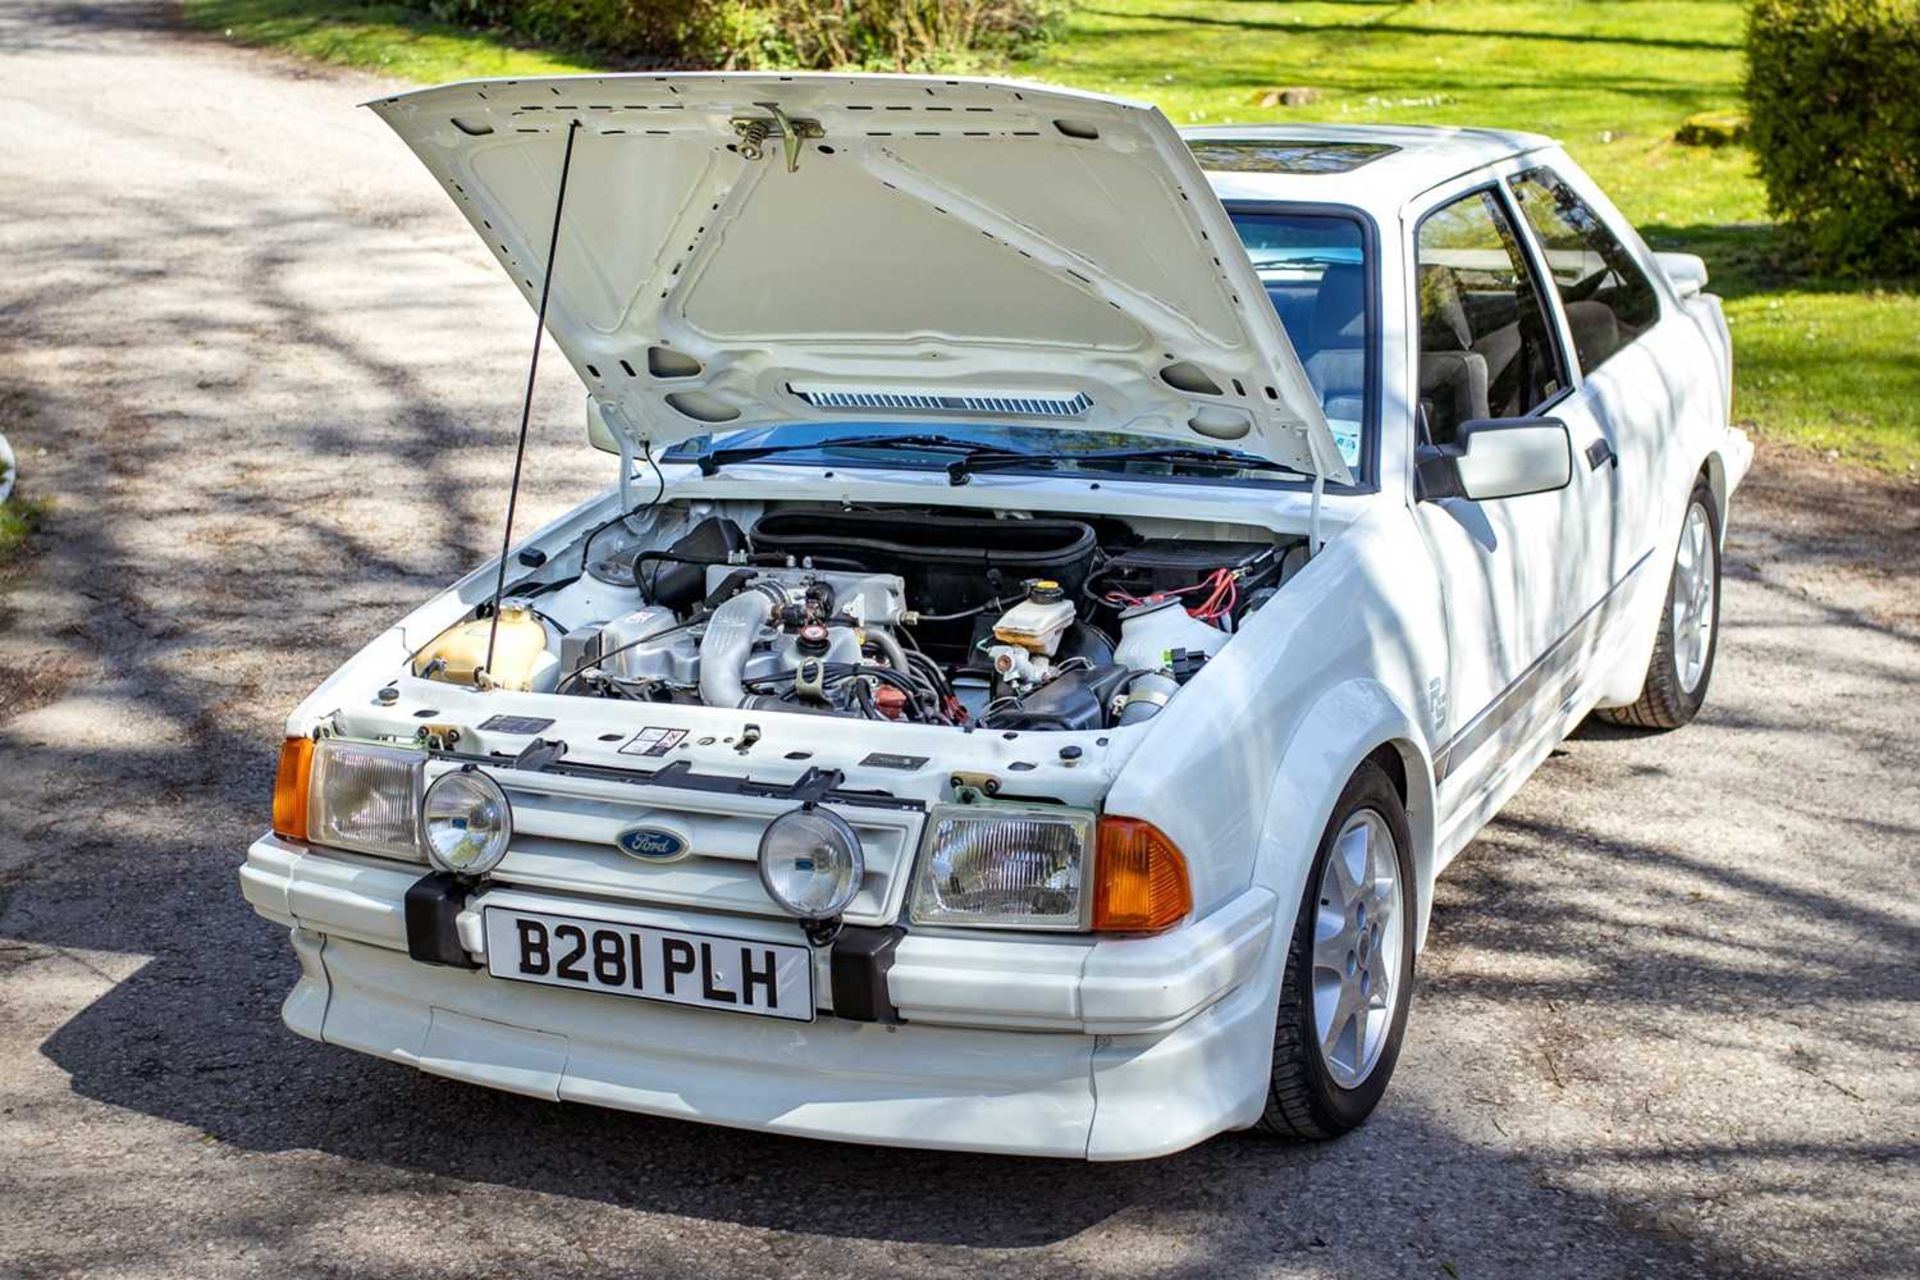 1985 Ford Escort RS Turbo S1 Subject to a full restoration  - Image 17 of 76